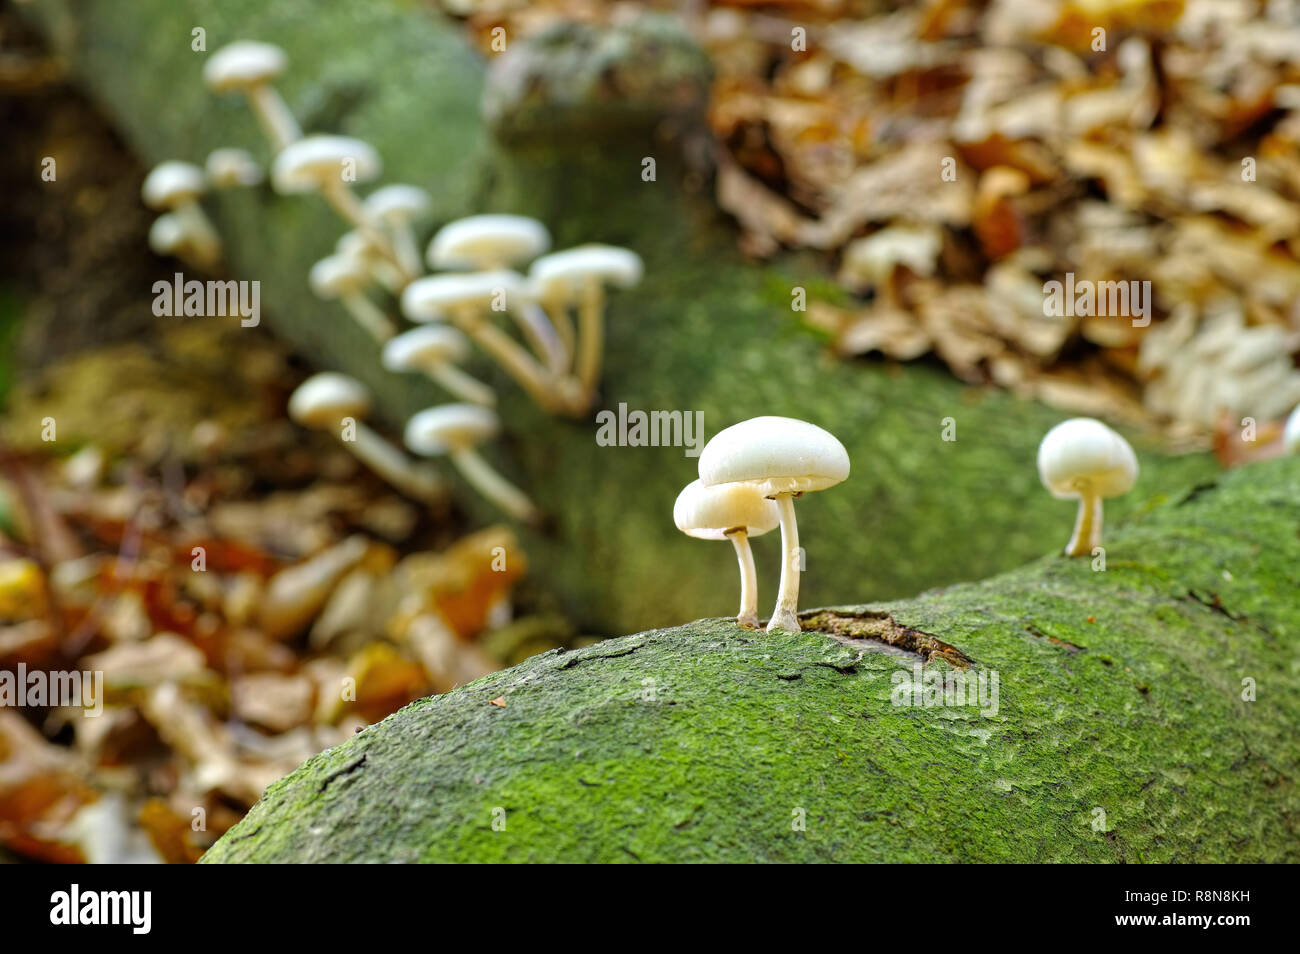 porcelain fungus or Oudemansiella mucida in autumn forest Stock Photo